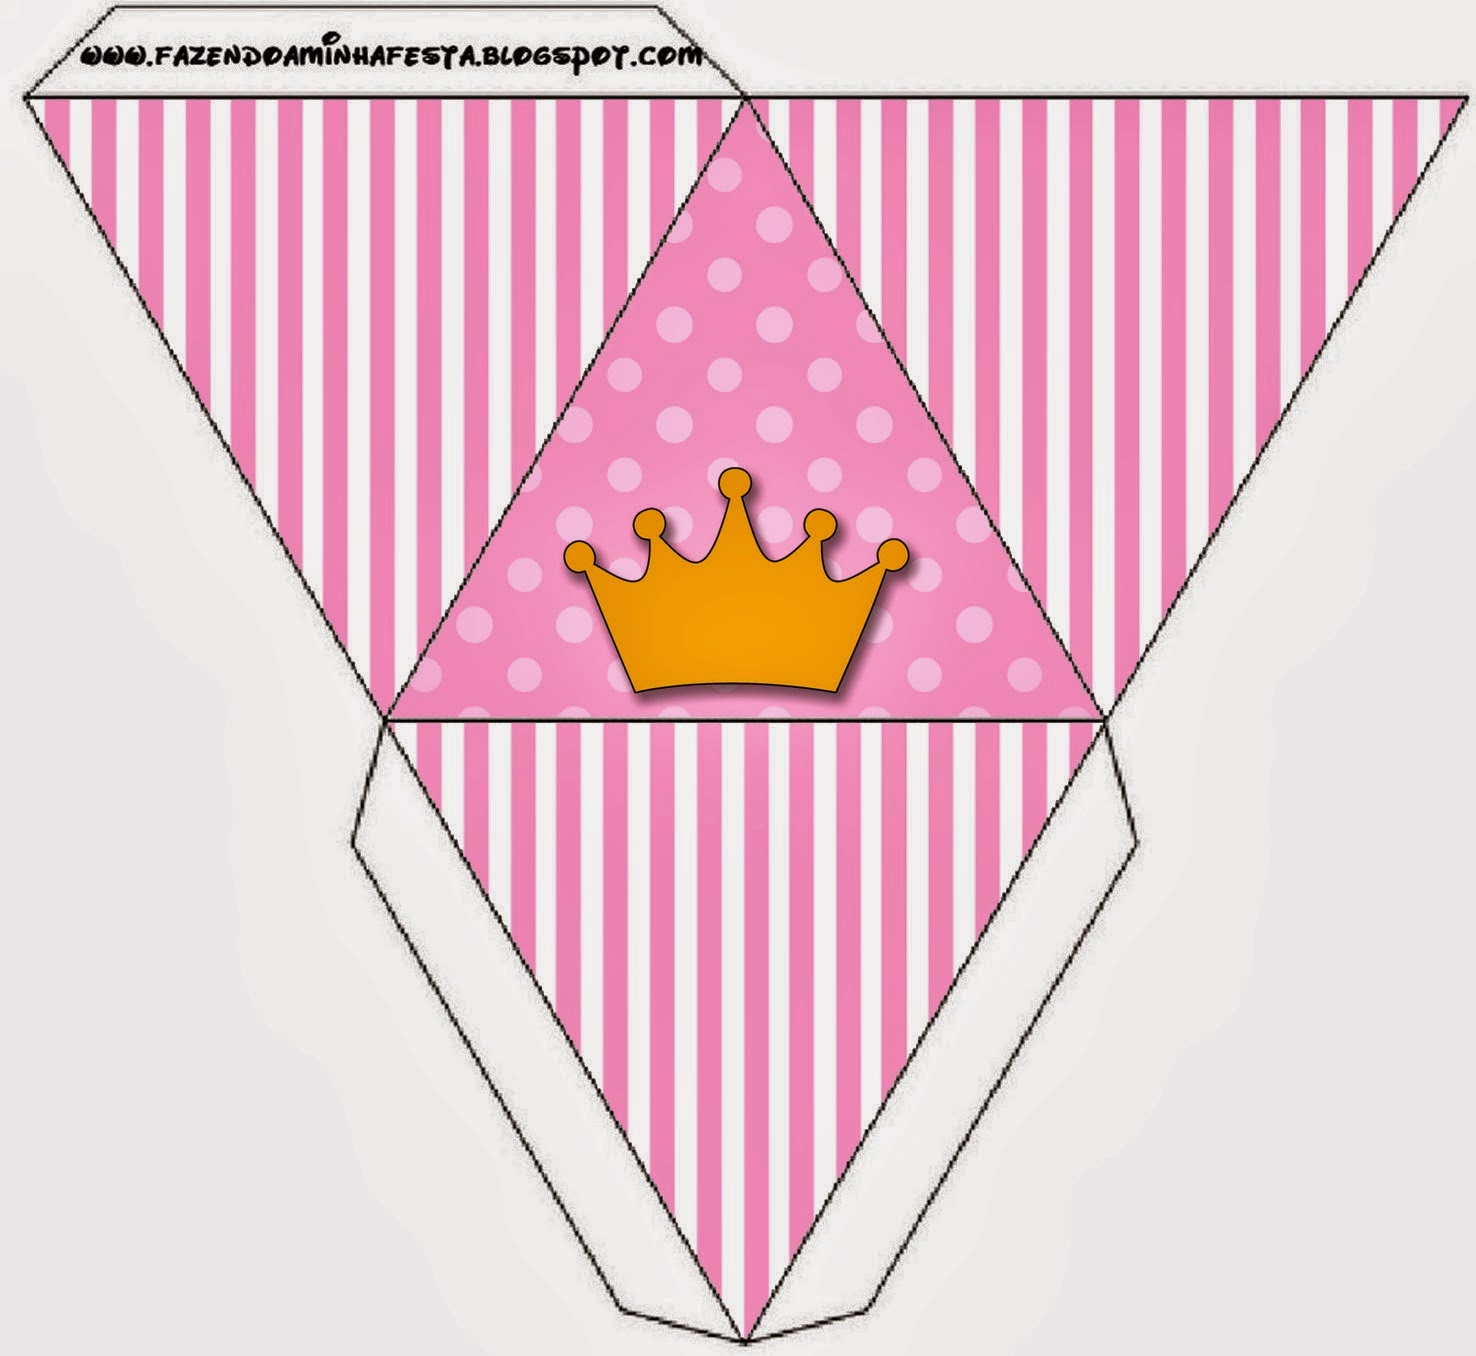 Princess Crowns: Free Printable Boxes. - Oh My Fiesta! in english